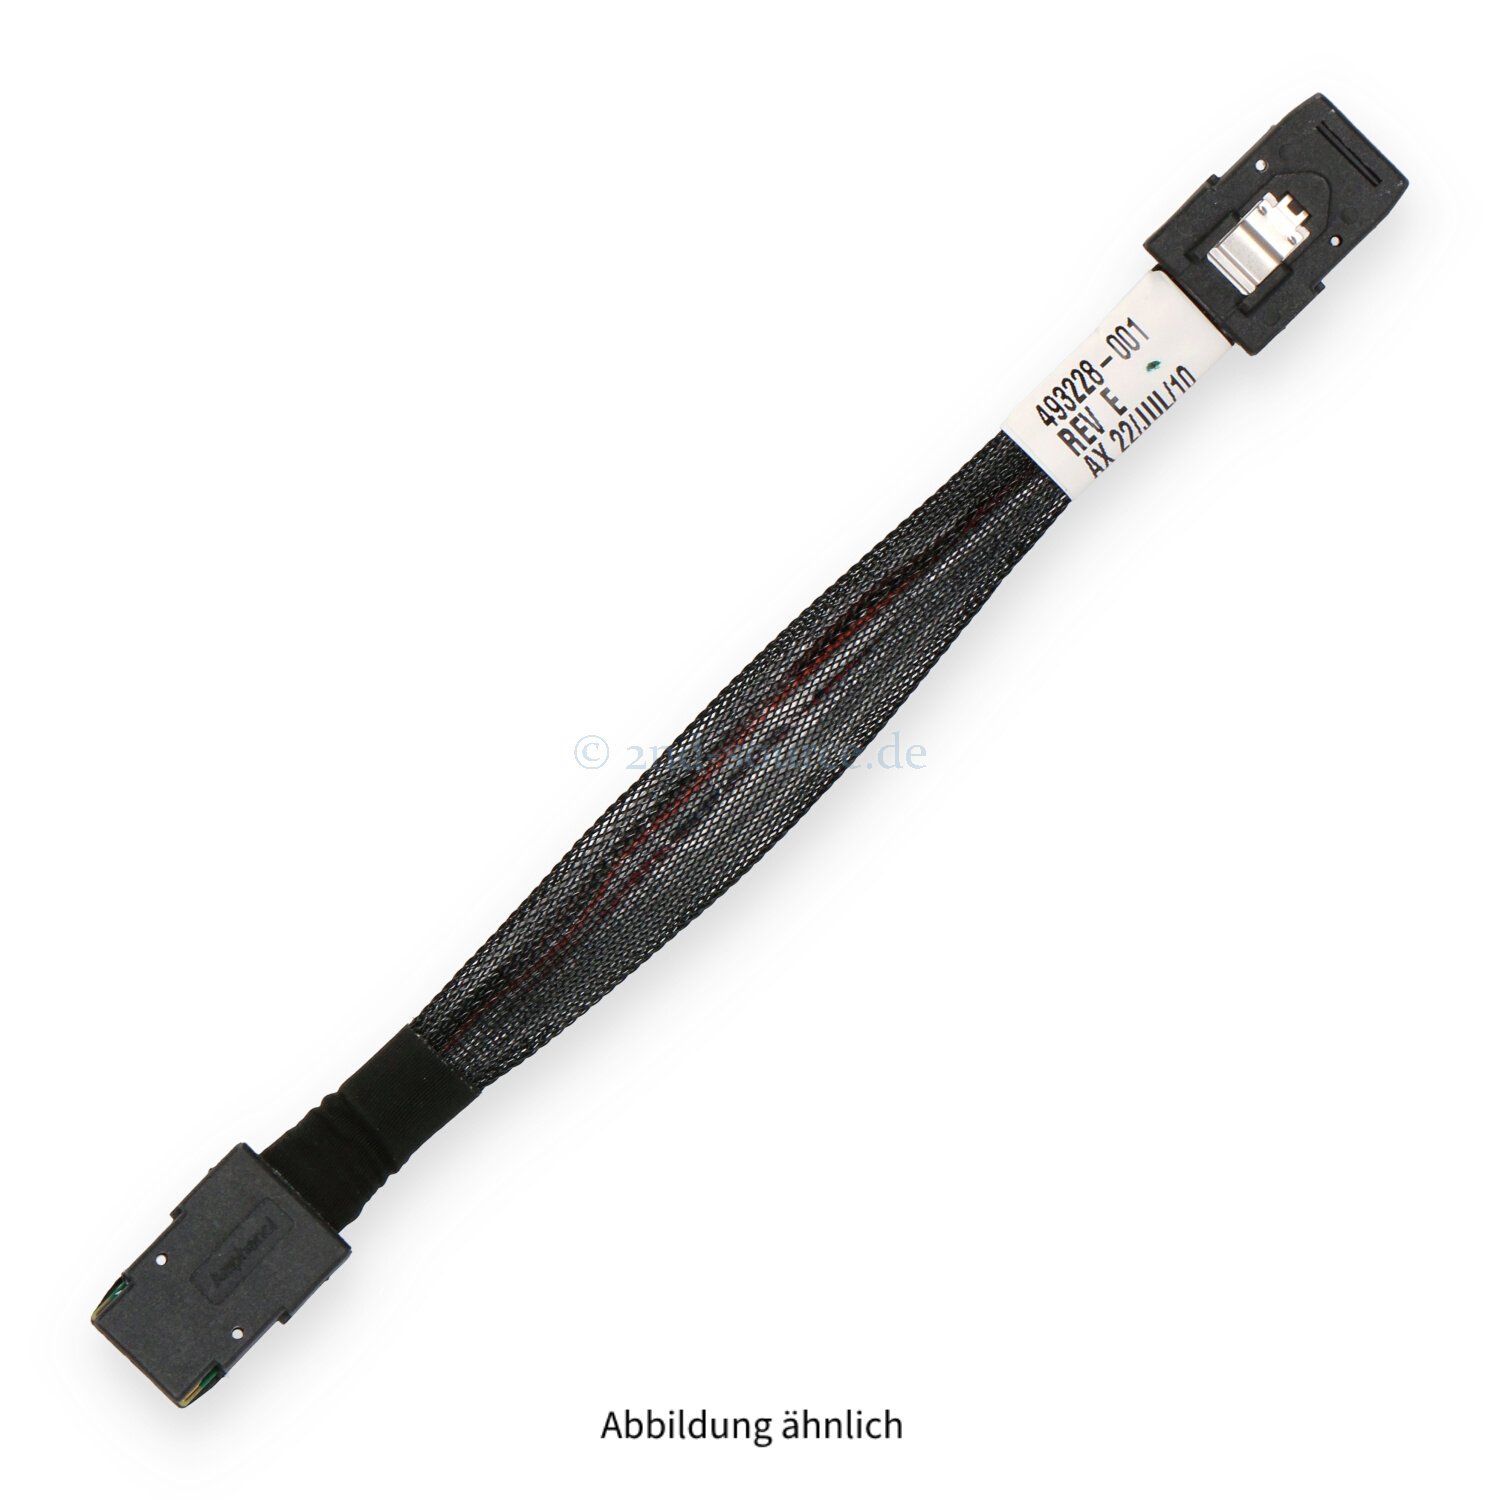 HPE 0.15m MiniSAS SFF-8087 to MiniSAS SFF-8087 Cable 493228-001